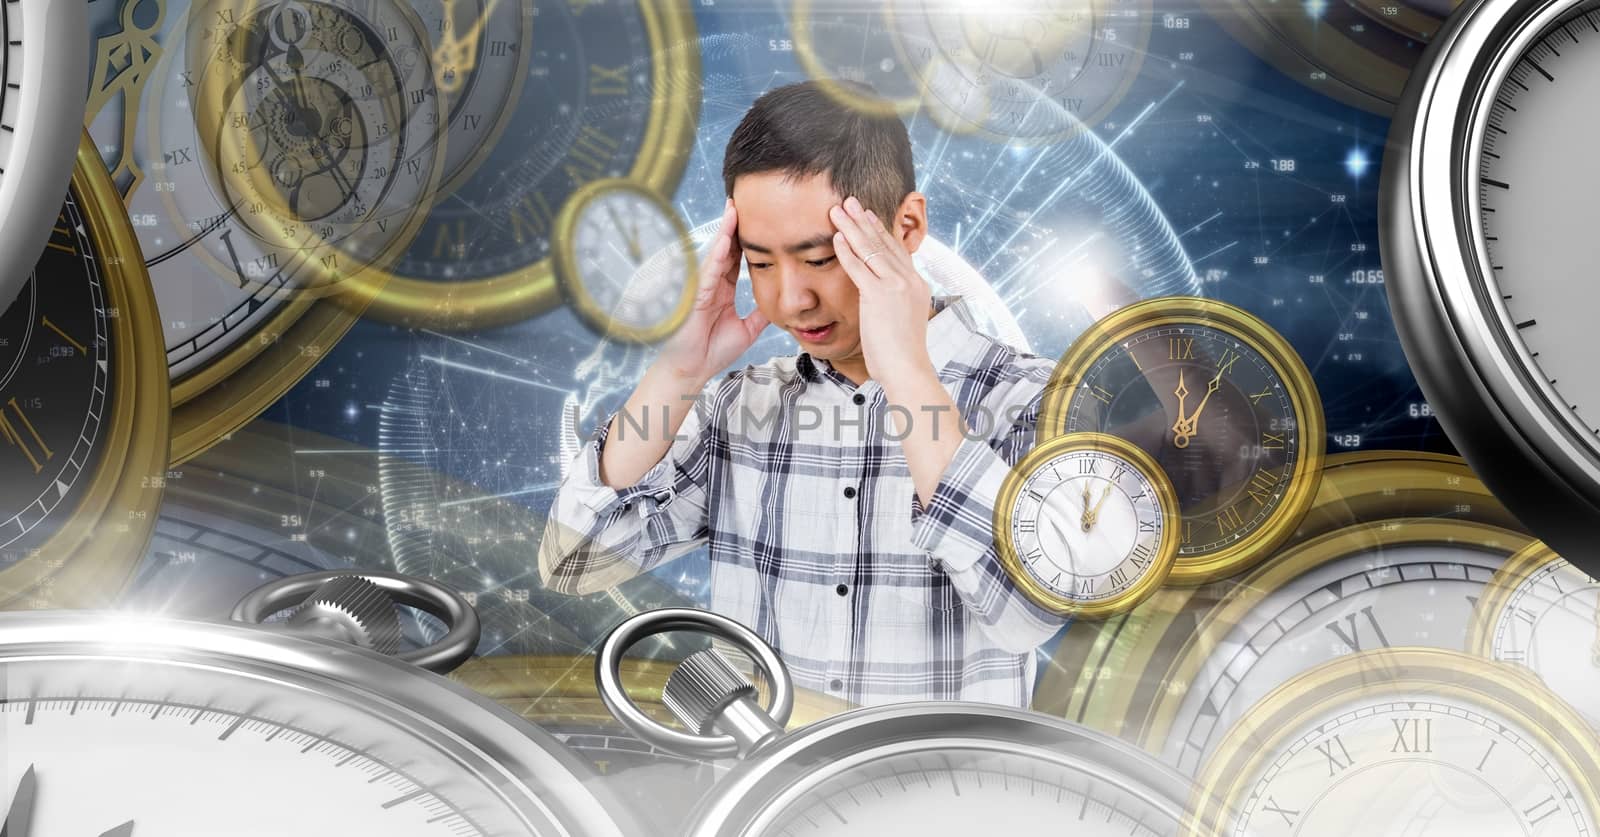 Digital composite of Man concentrating with Surreal Time and space clock concept